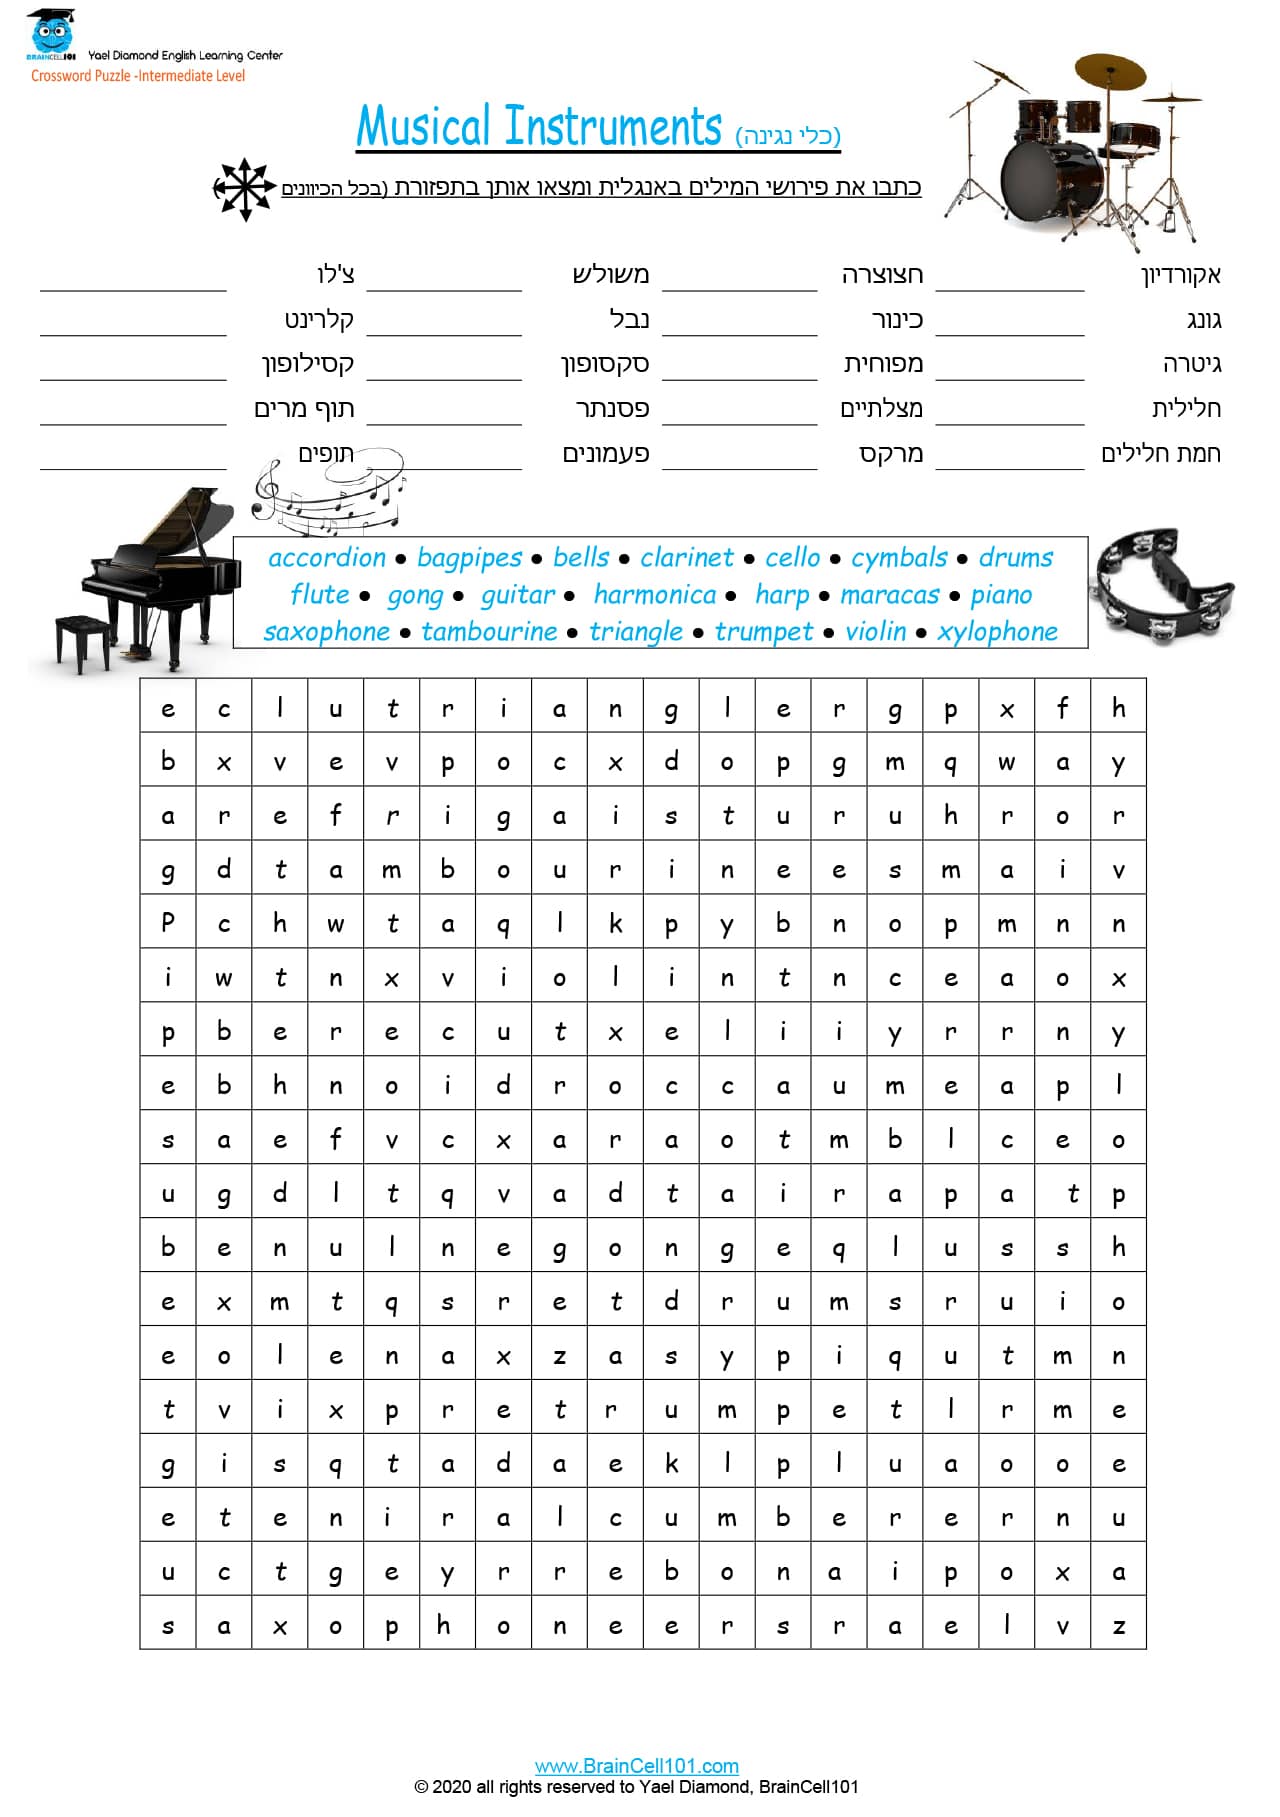 Crossword Puzzle Musical Instruments braincell101